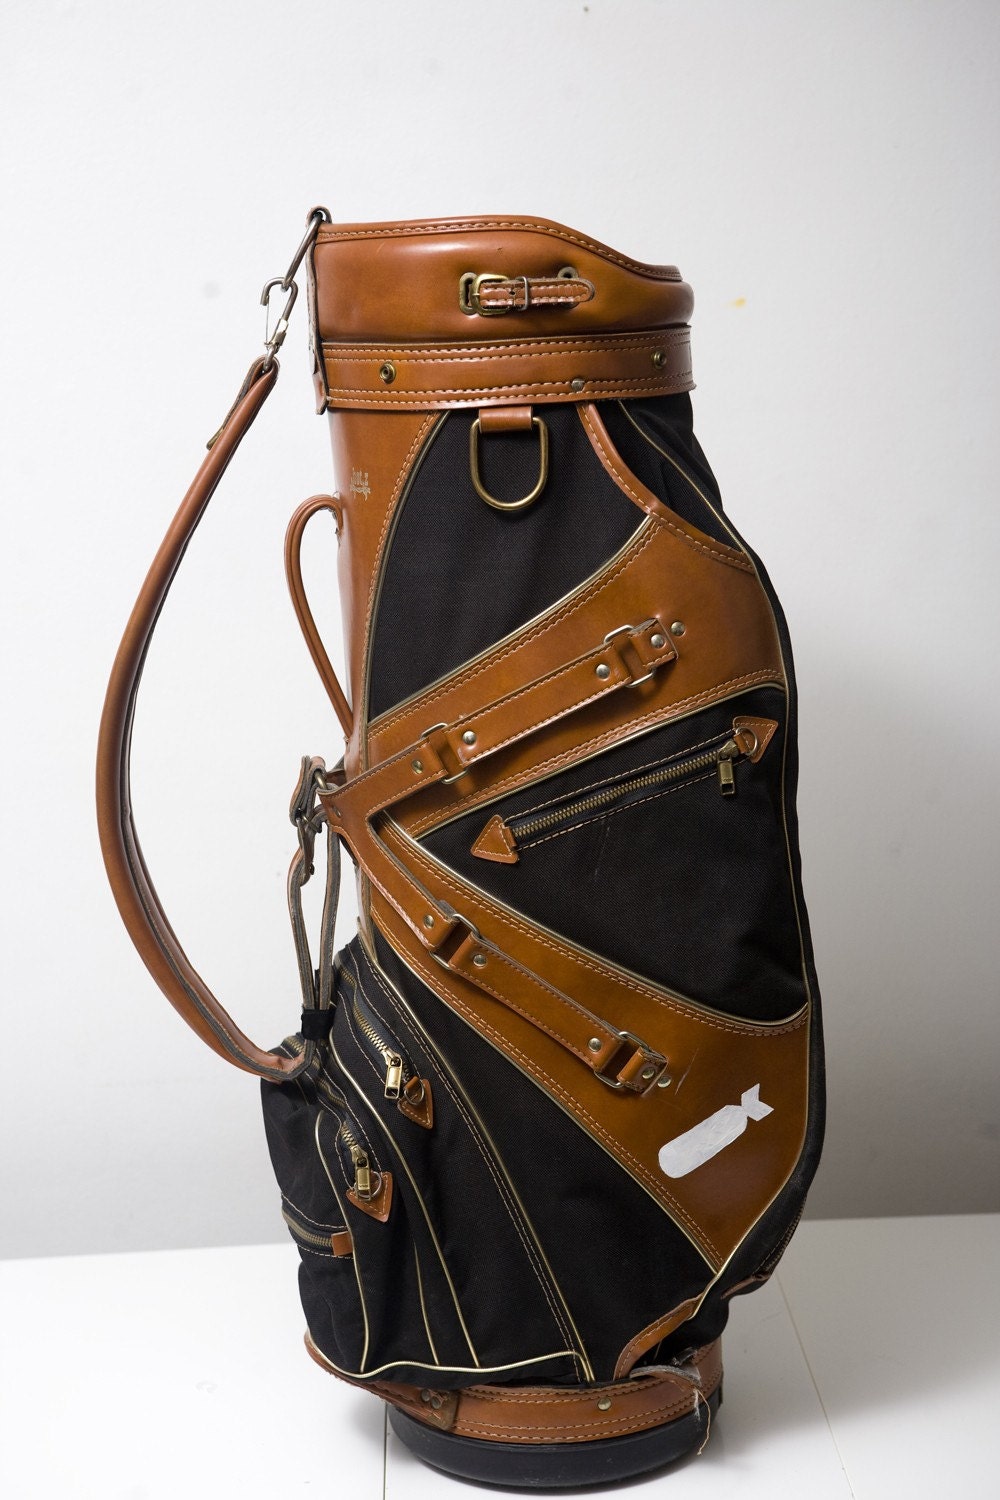 Vintage Black and Tan Golf Bag Upcycled with Dropping Bombs